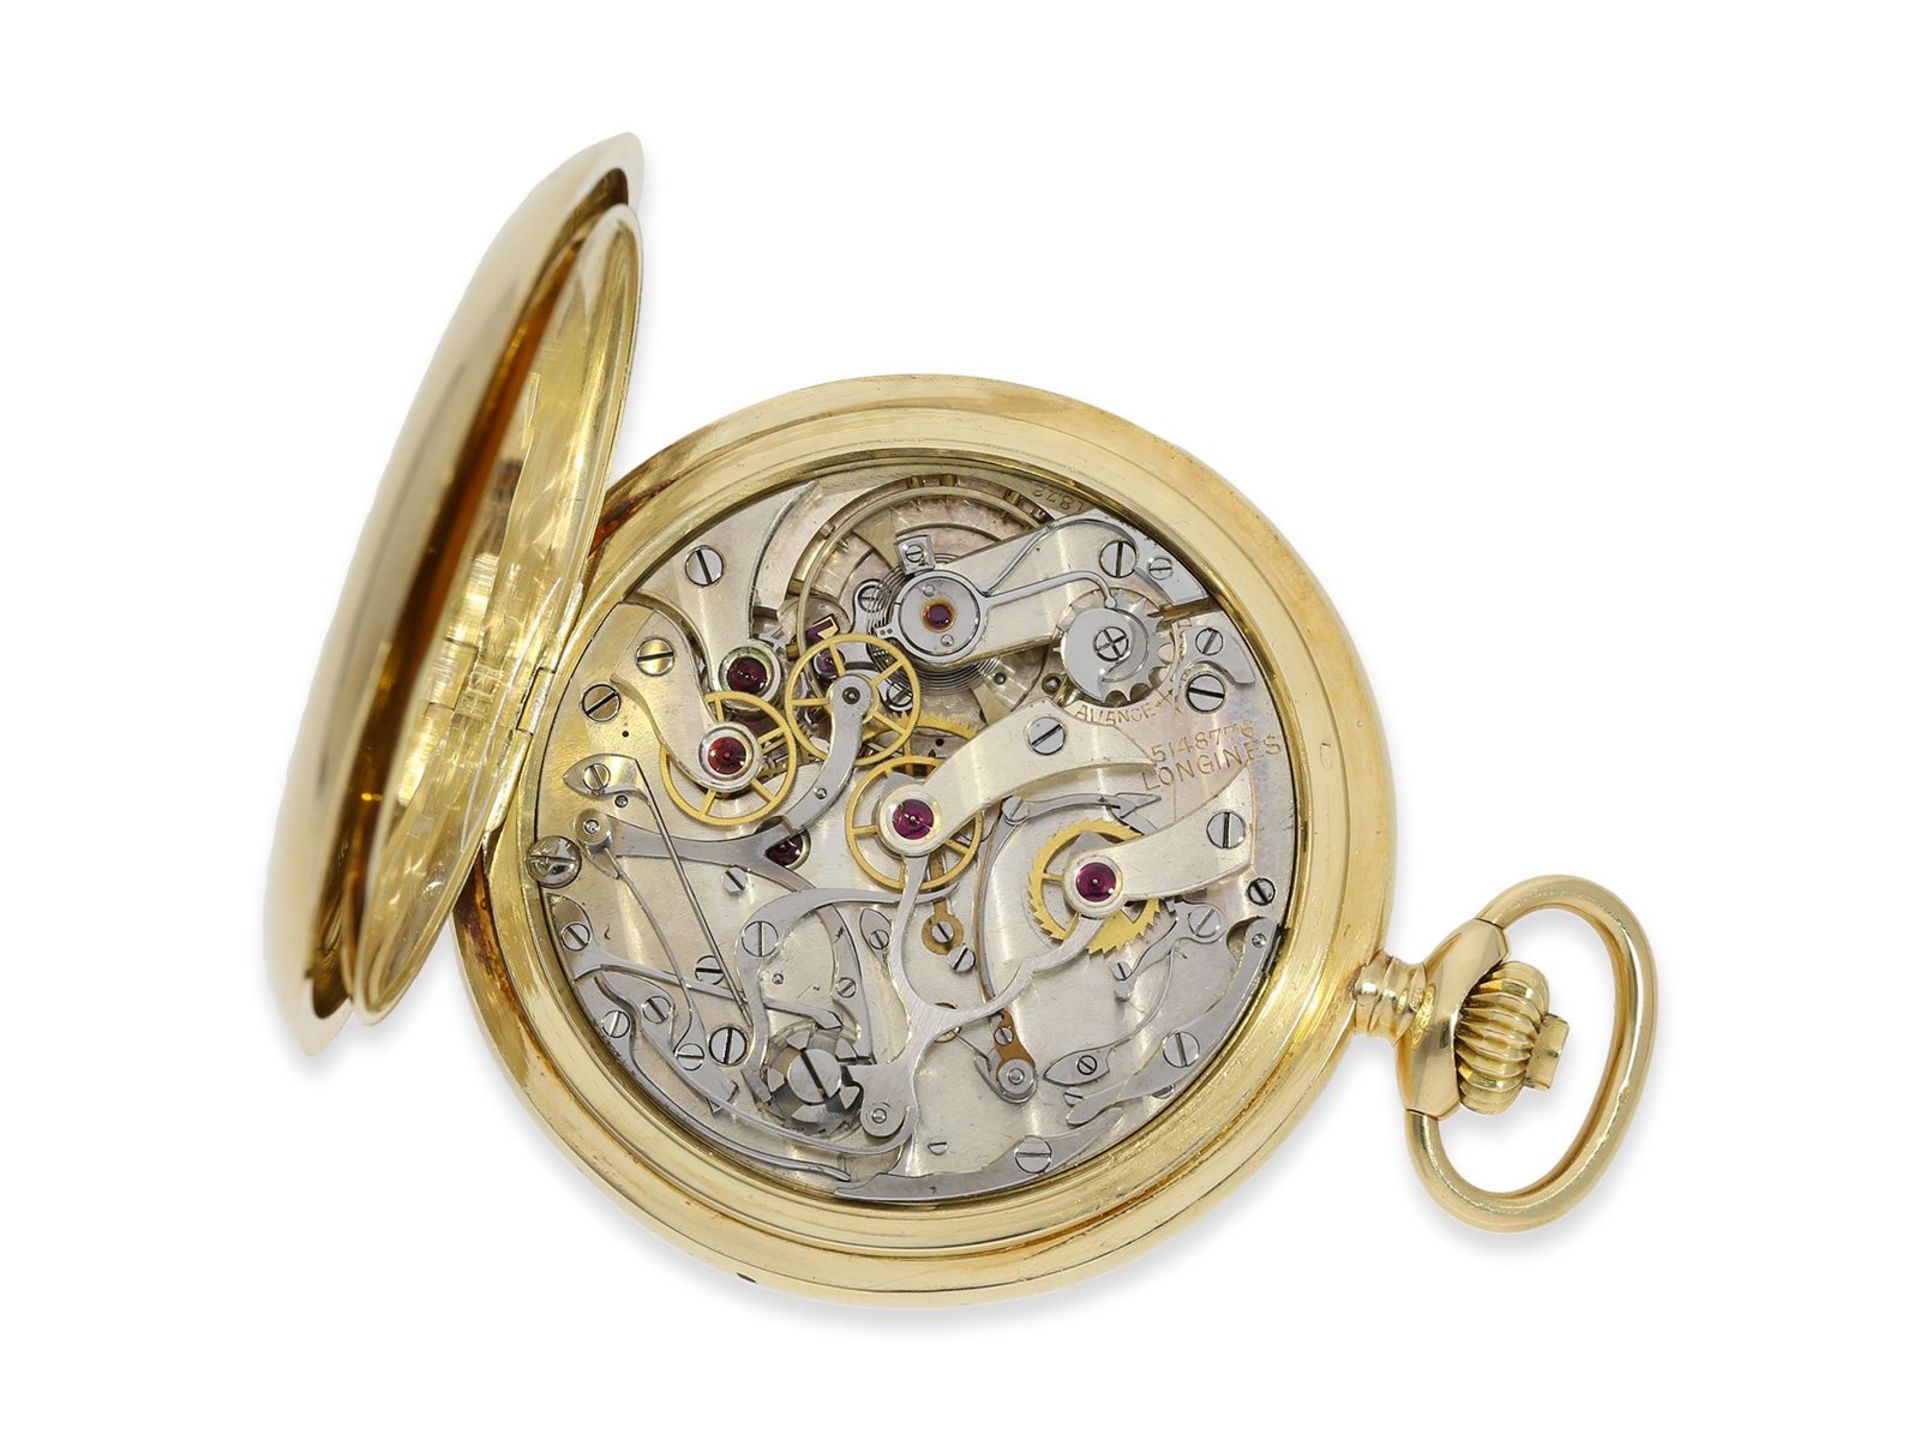 Pocket watch: fine 18K gold doctor's chronograph, Longines, ca. 1915, Ankerchronometer quality - Image 2 of 6